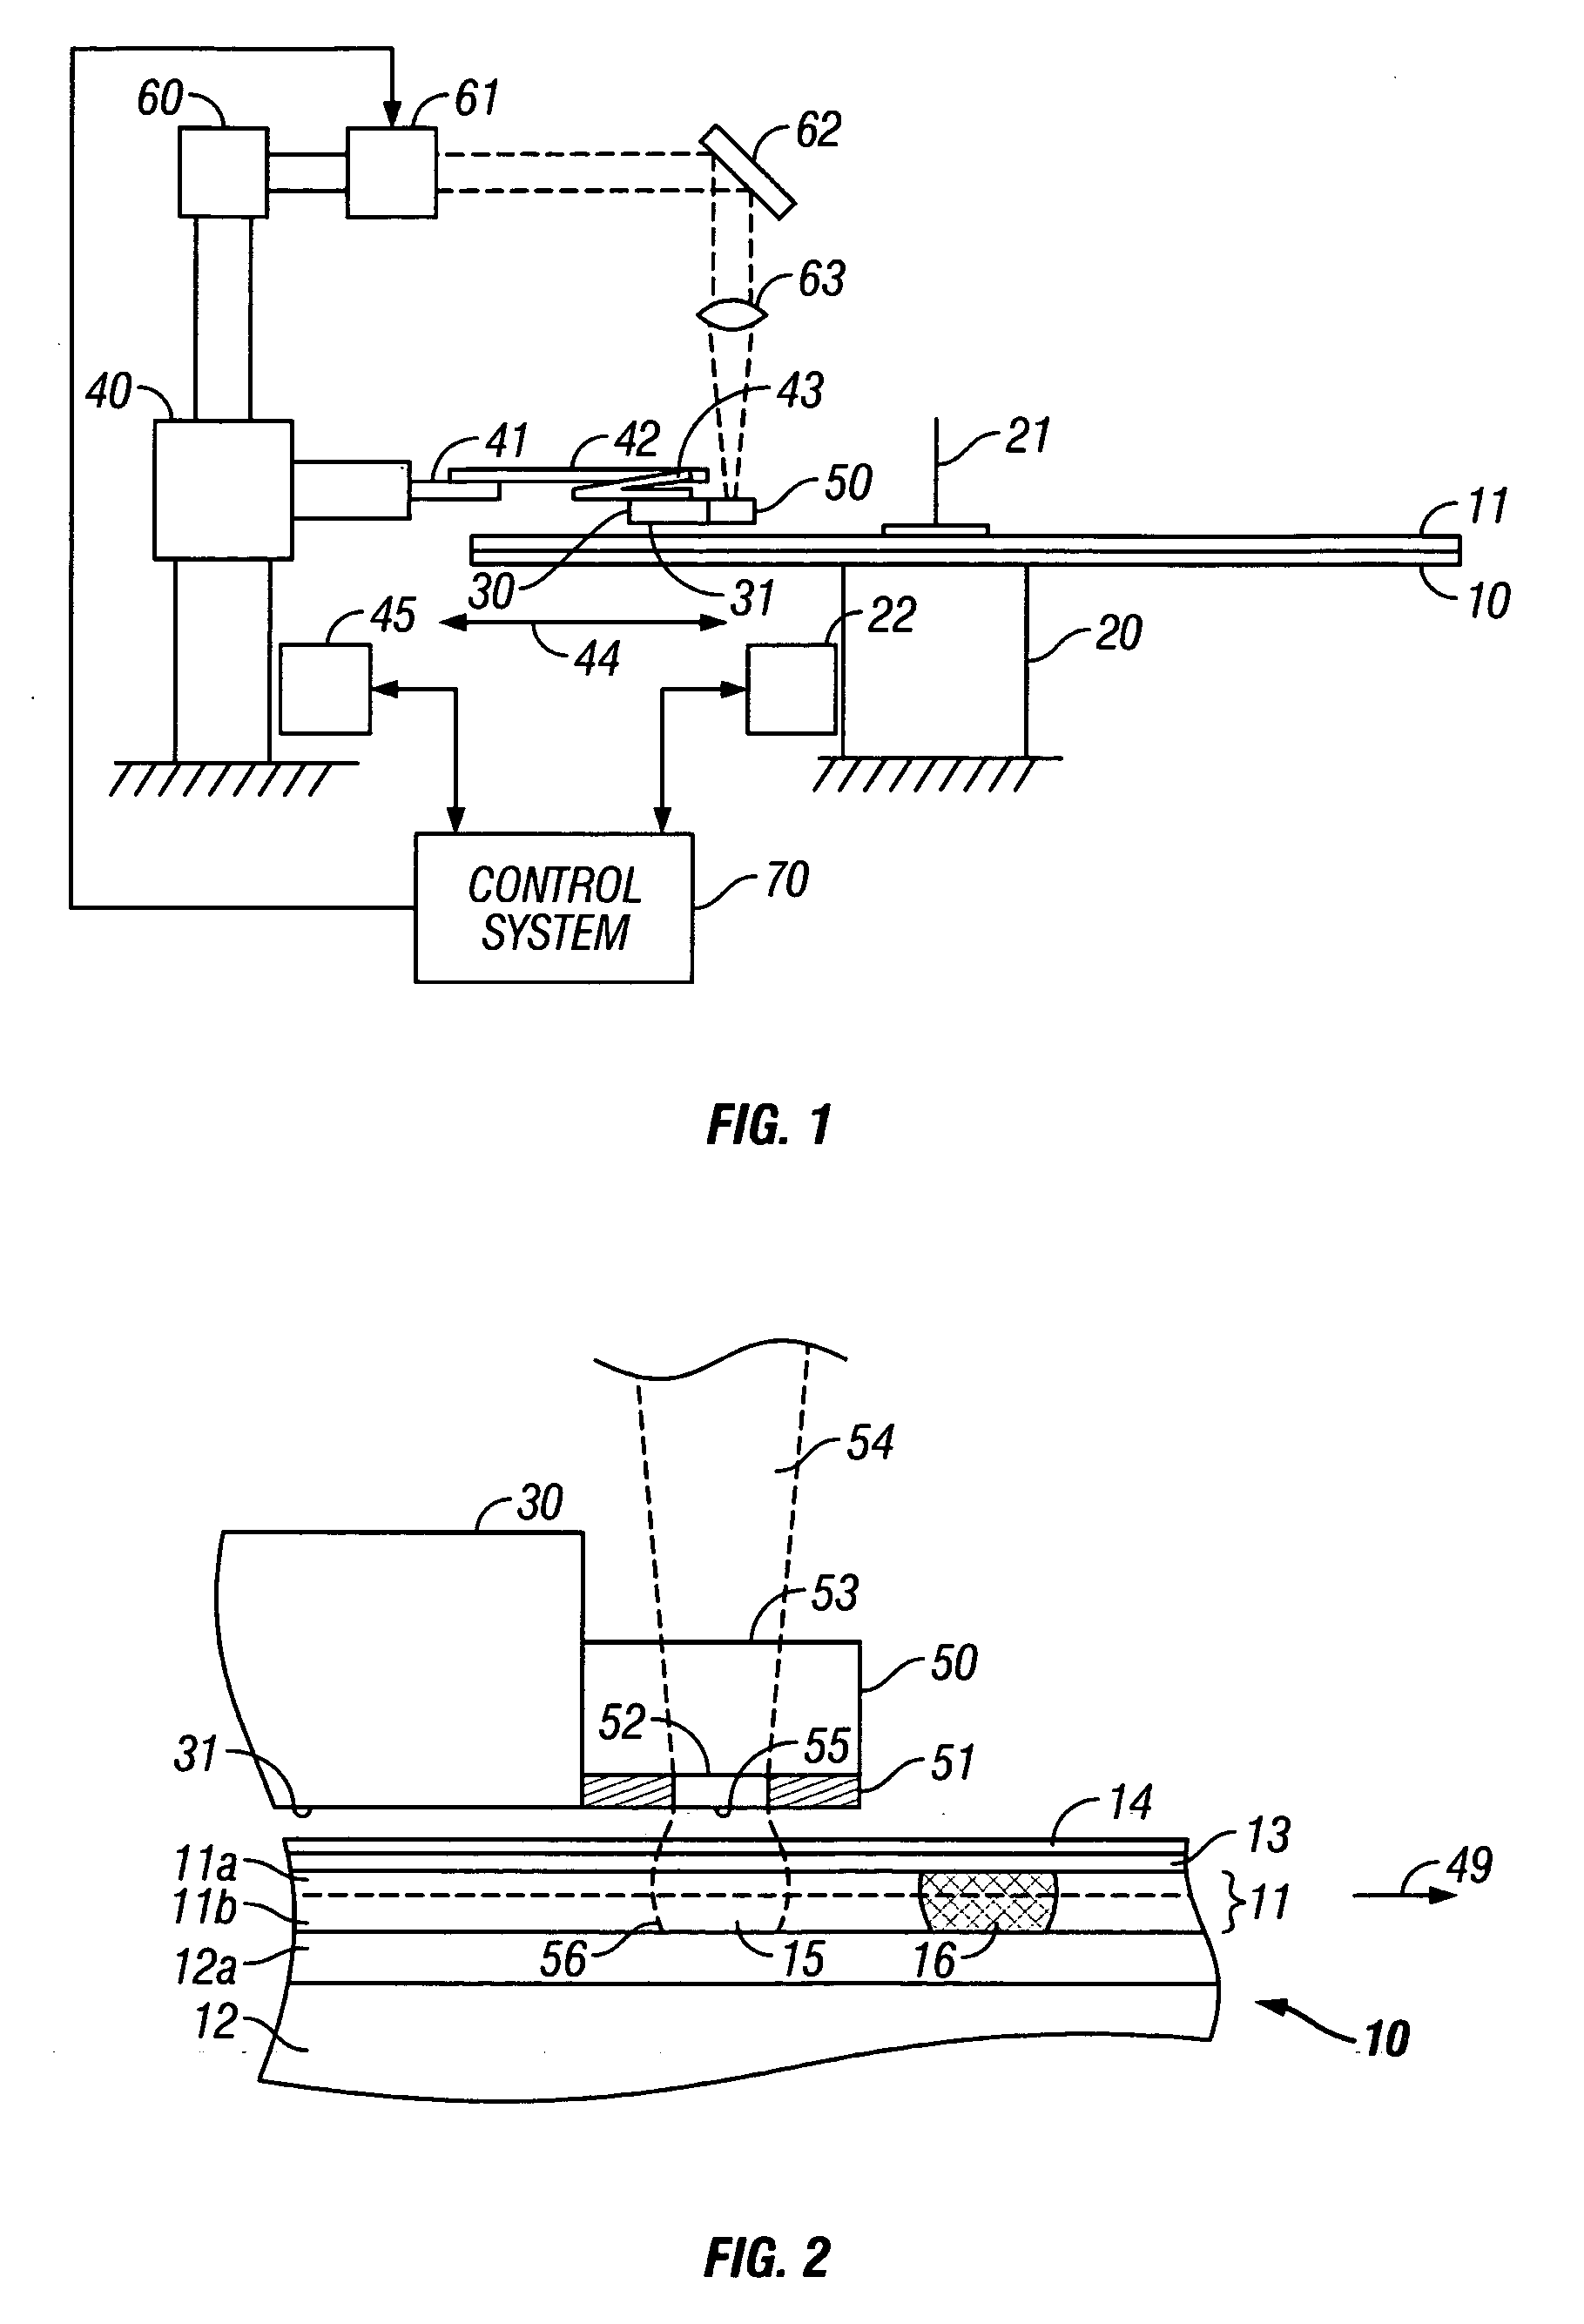 System and method for patterning a master disk for nanoimprinting patterned magnetic recording disks